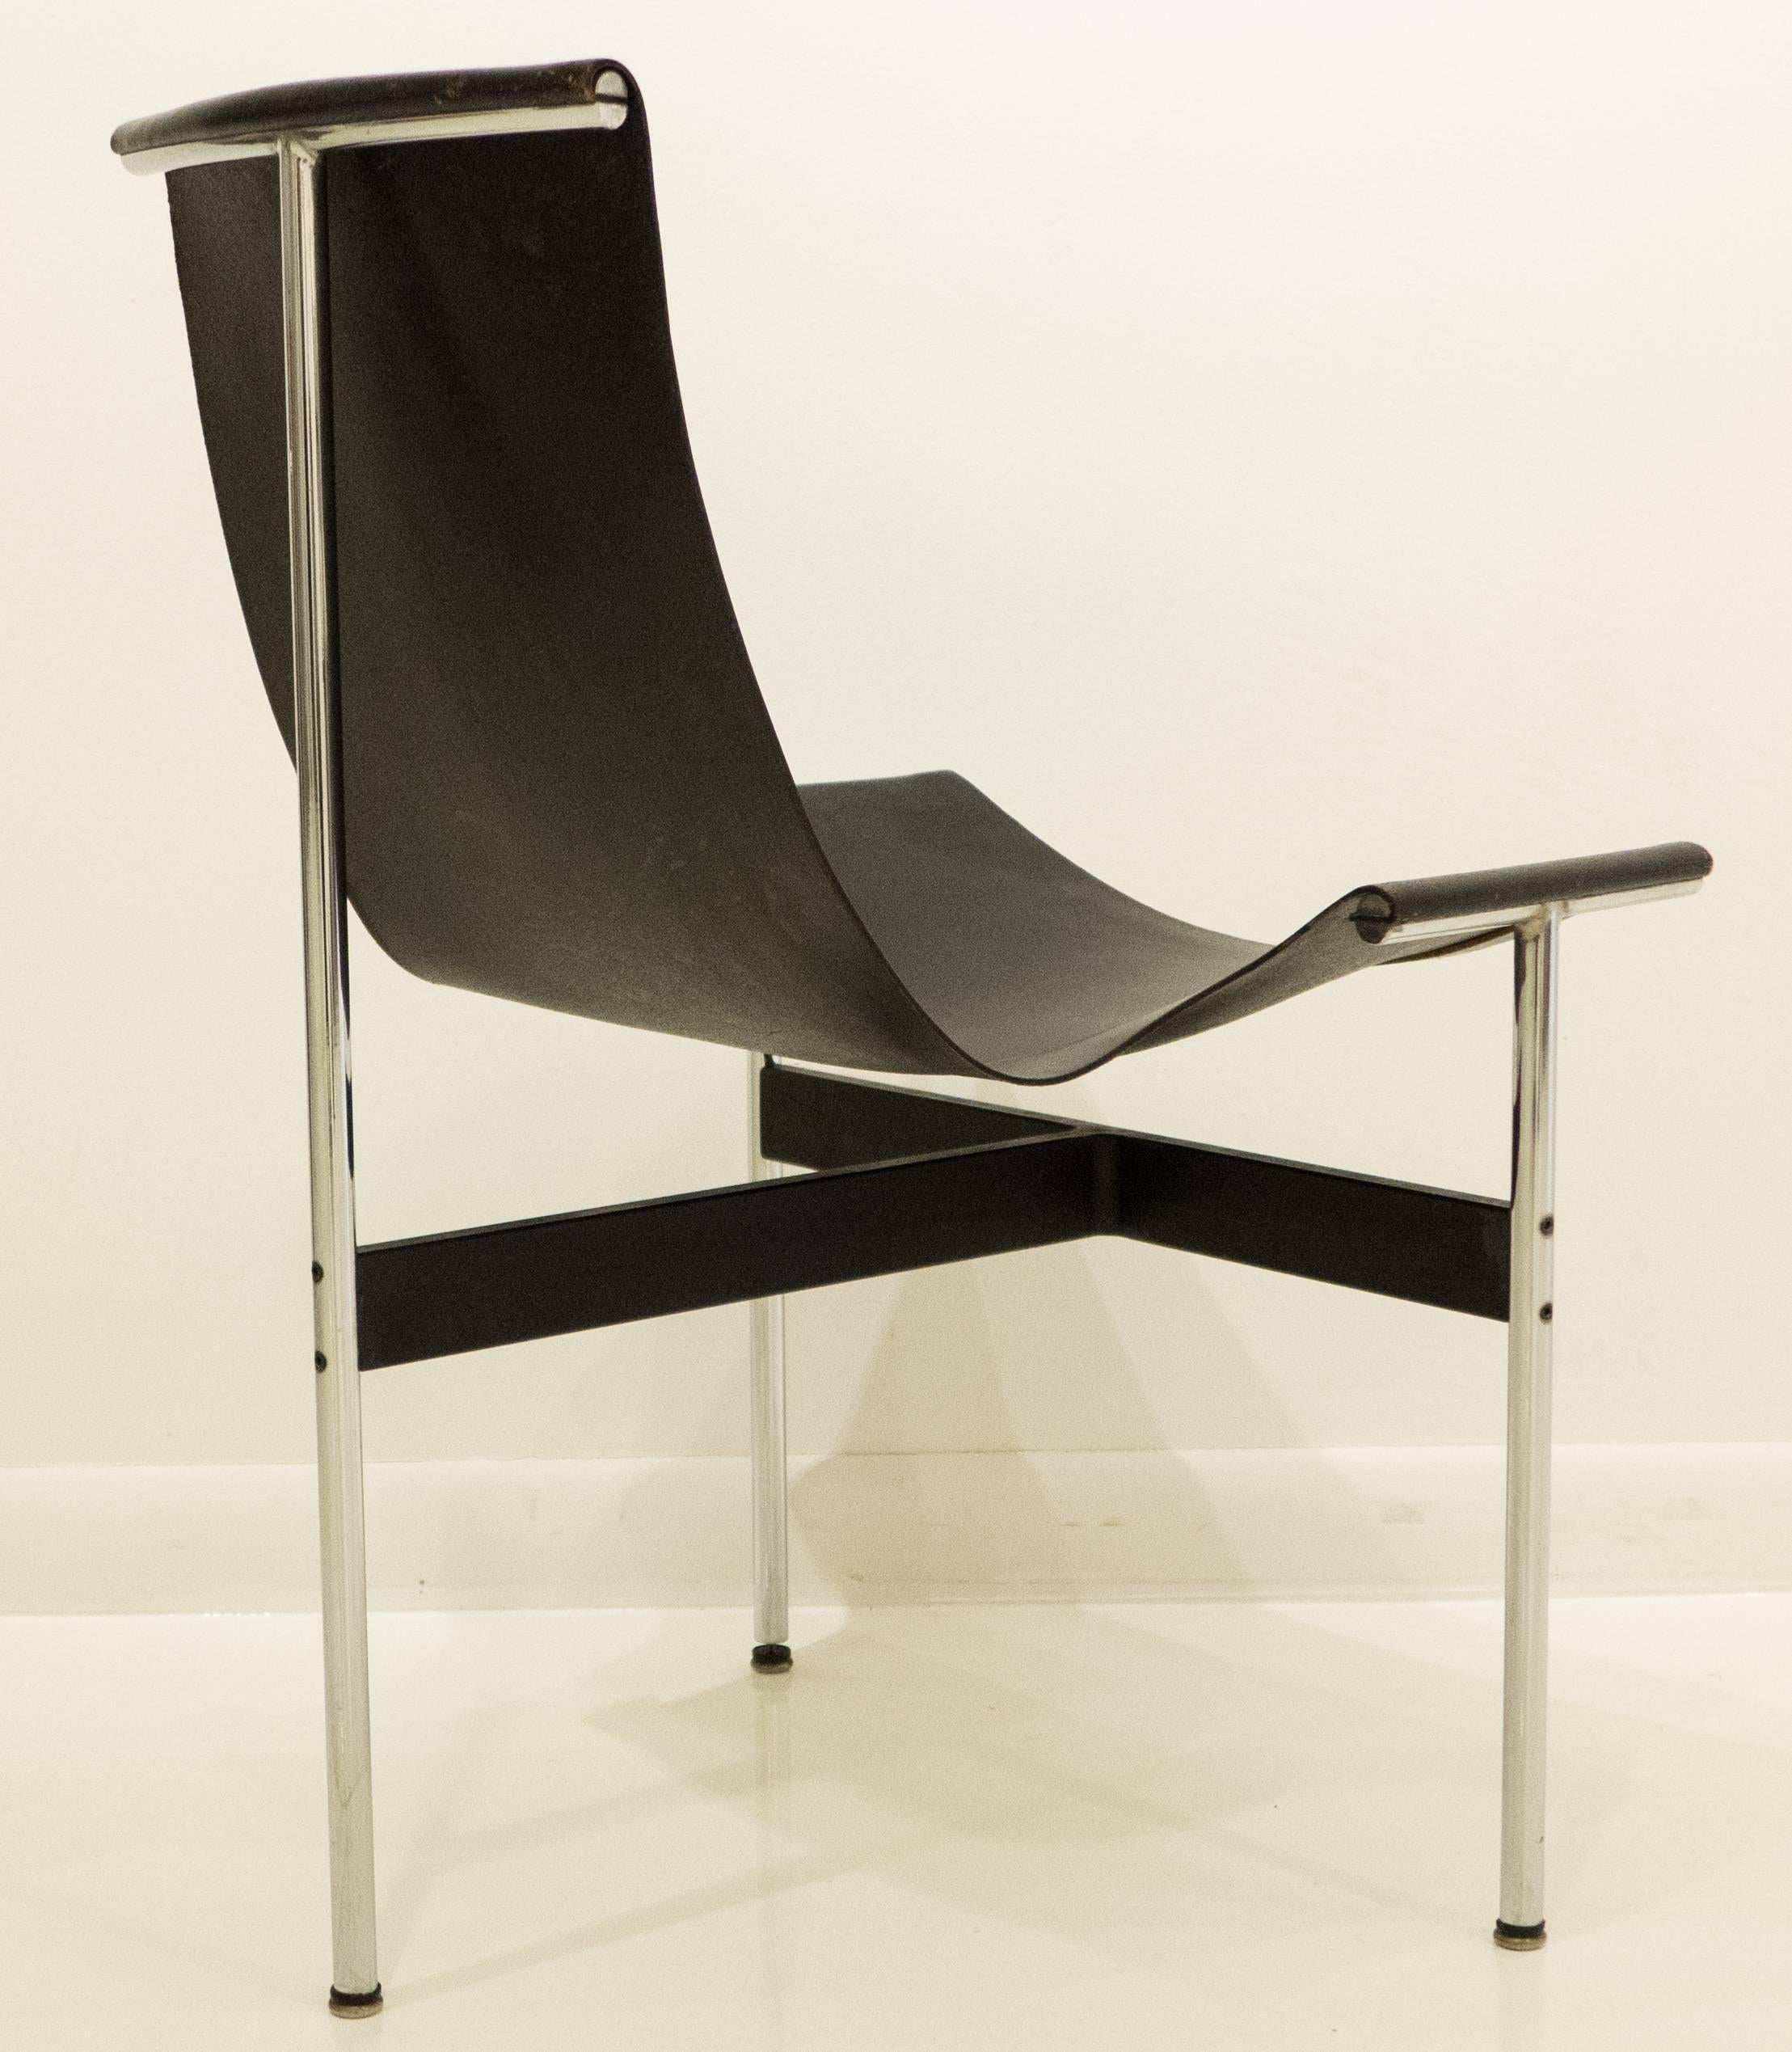 International Style Early Laverne T-Chair by Katavolos, Littell and Kelley